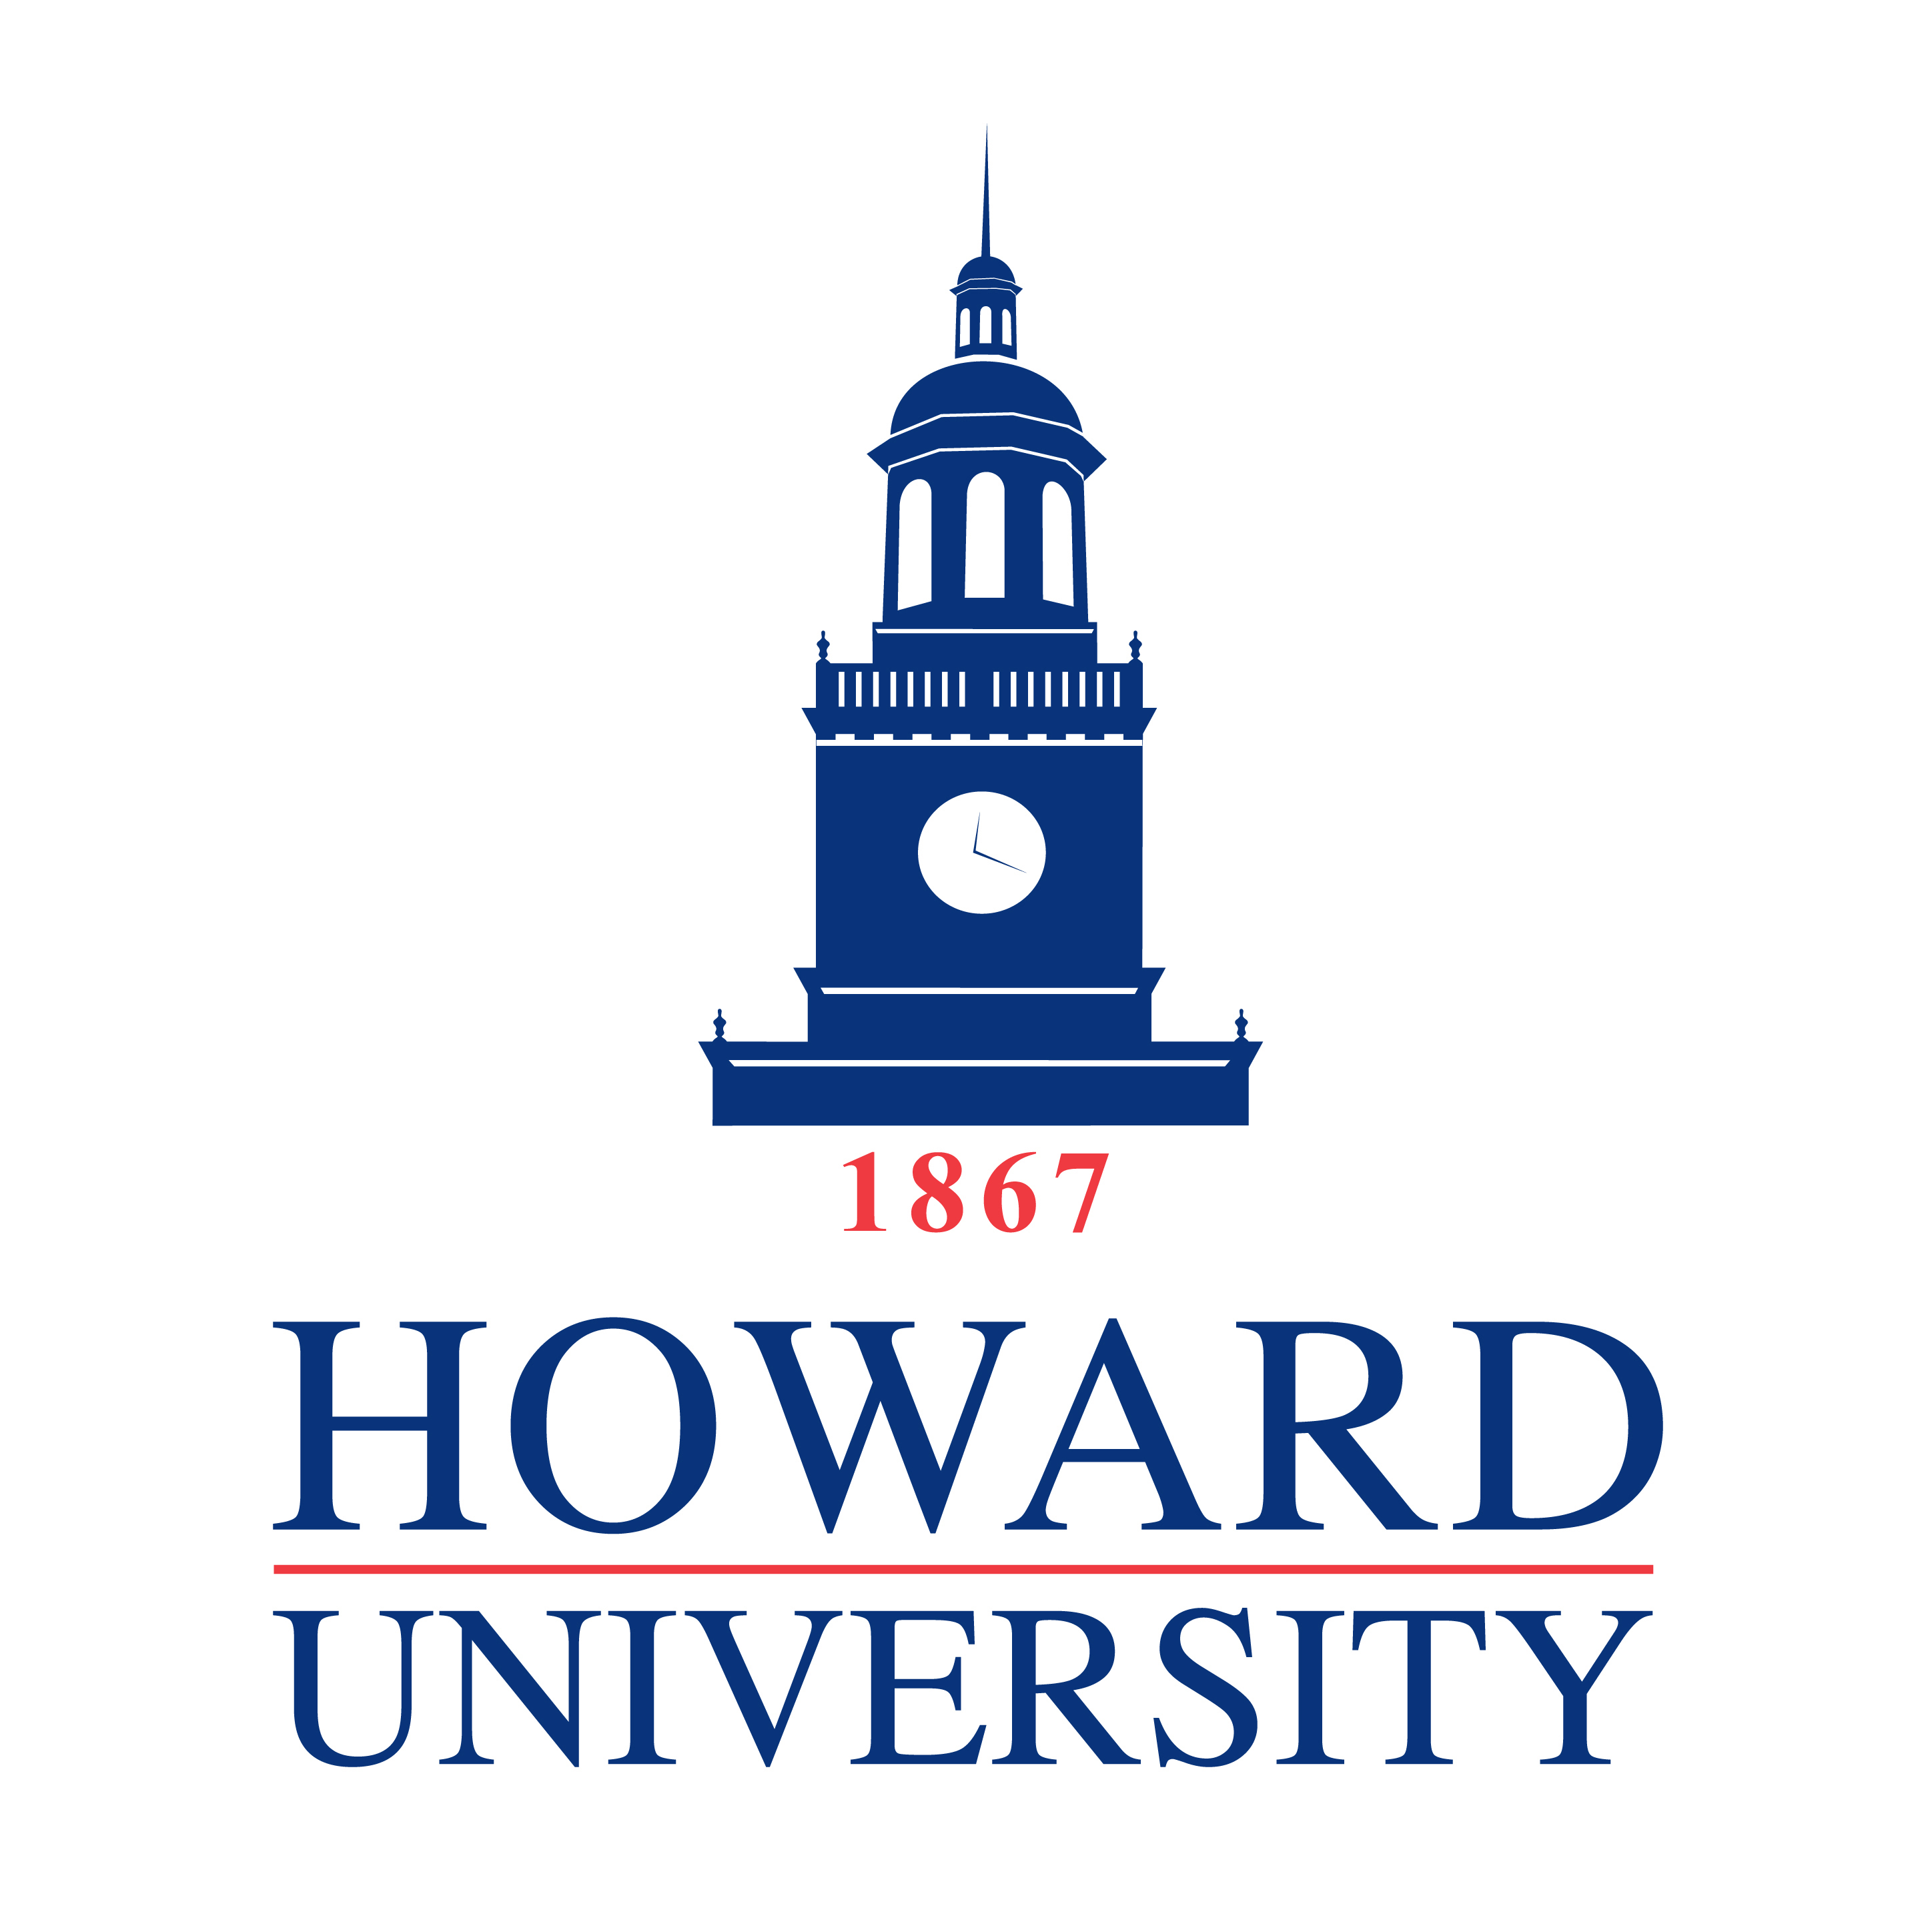 Howard University’s 148th Commencement Convocation